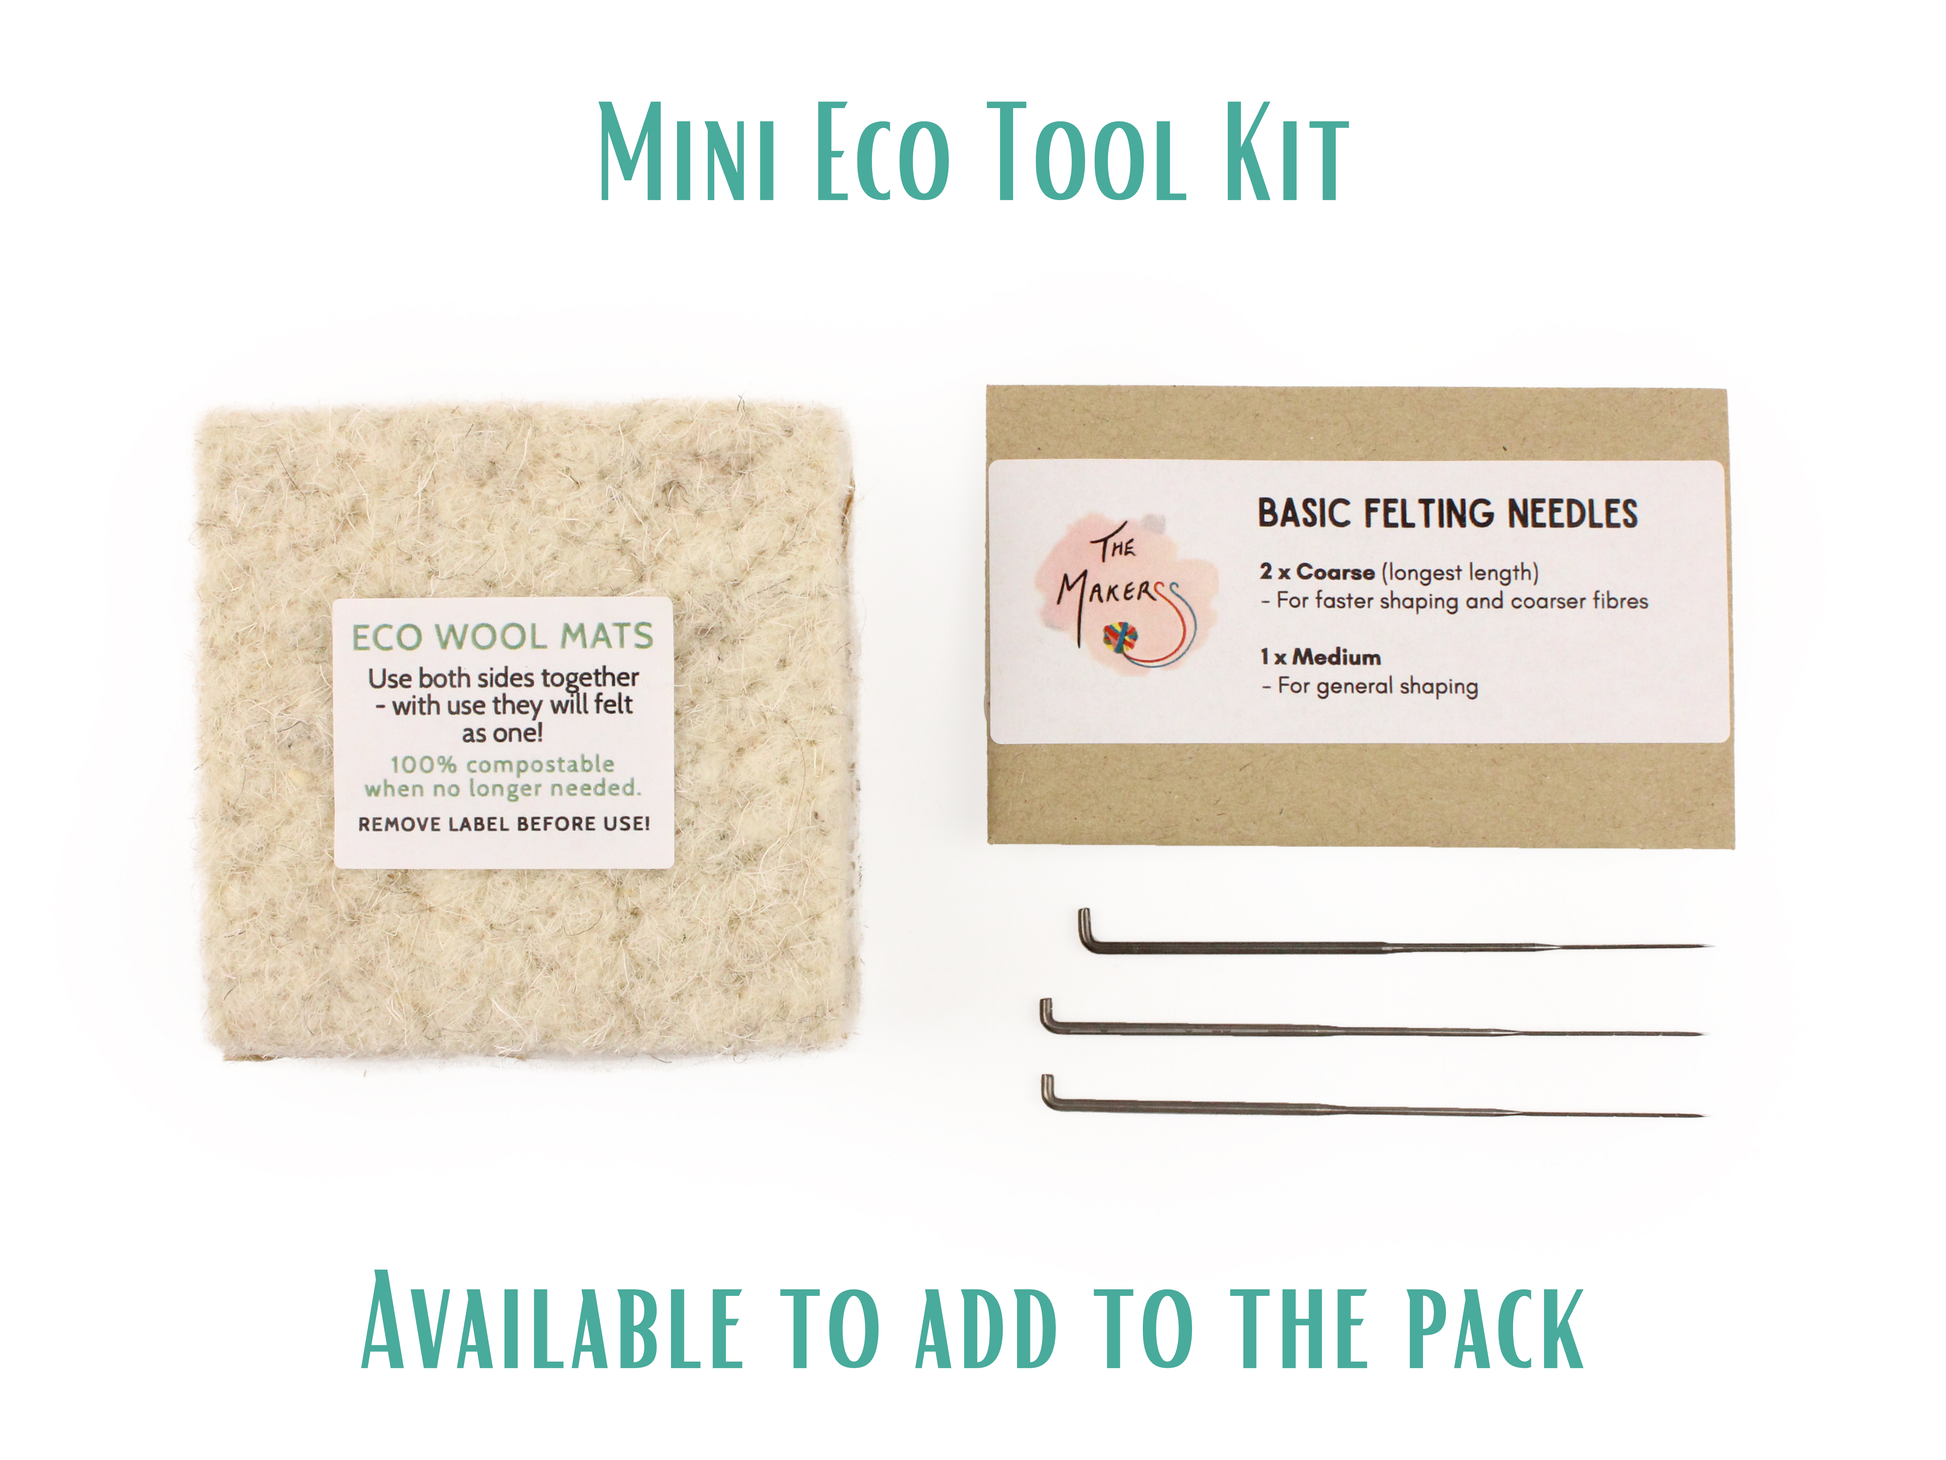 Puffin Needle Felt Pack - with or without tools - The Makerss